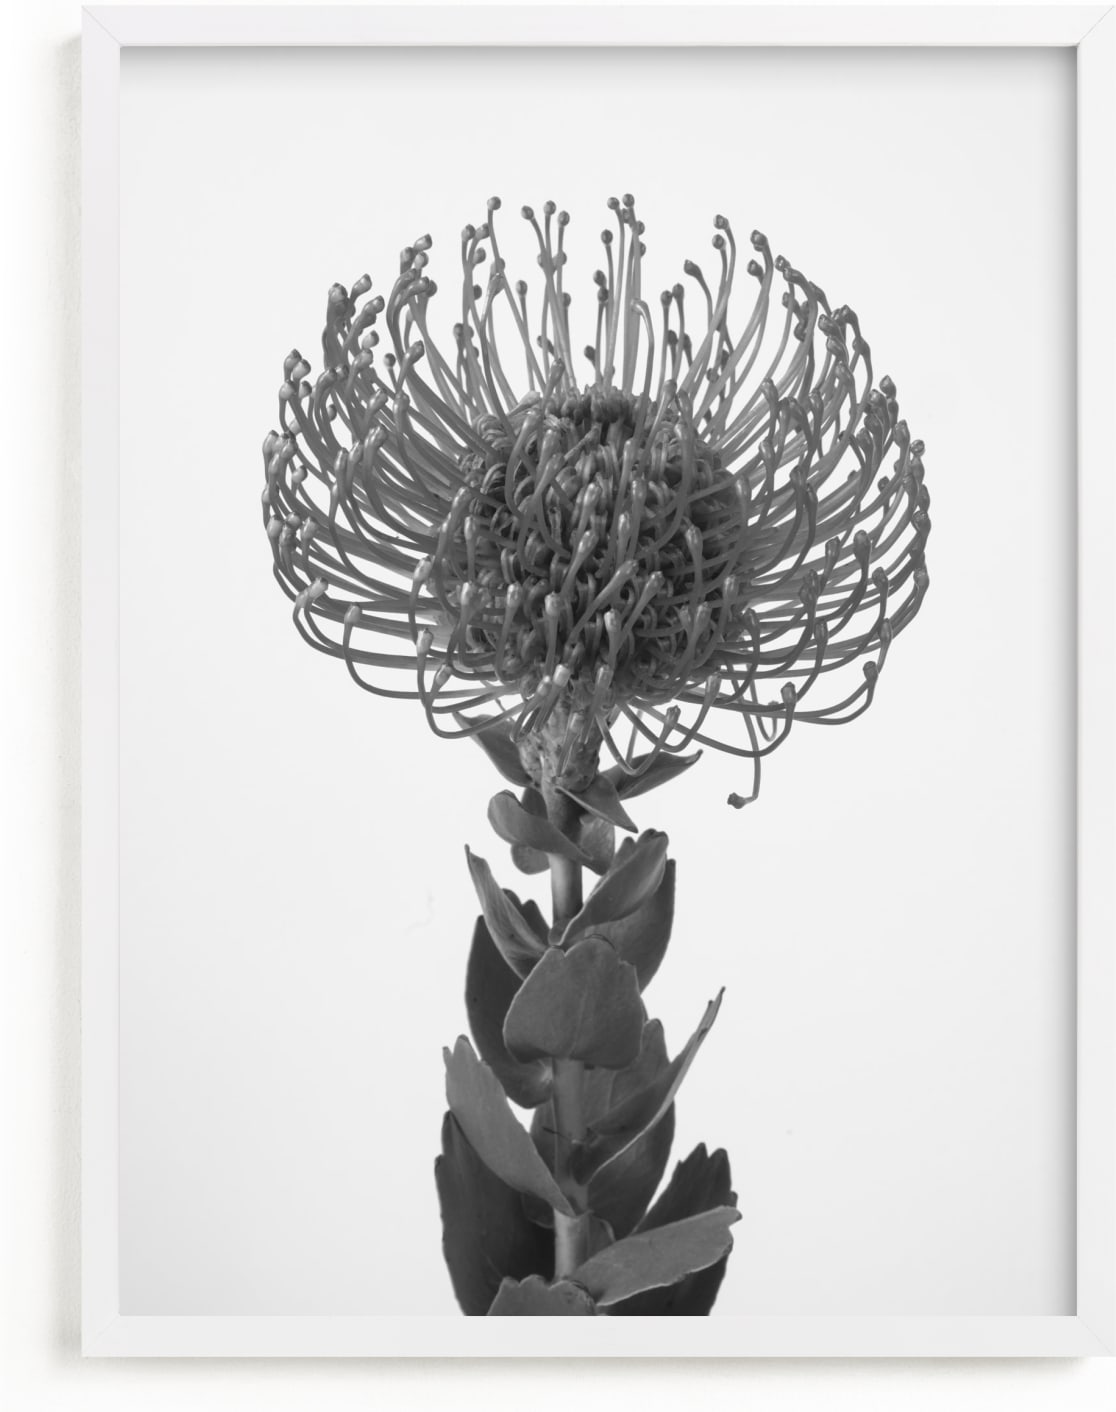 This is a black and white art by Kamala Nahas called Protea I.